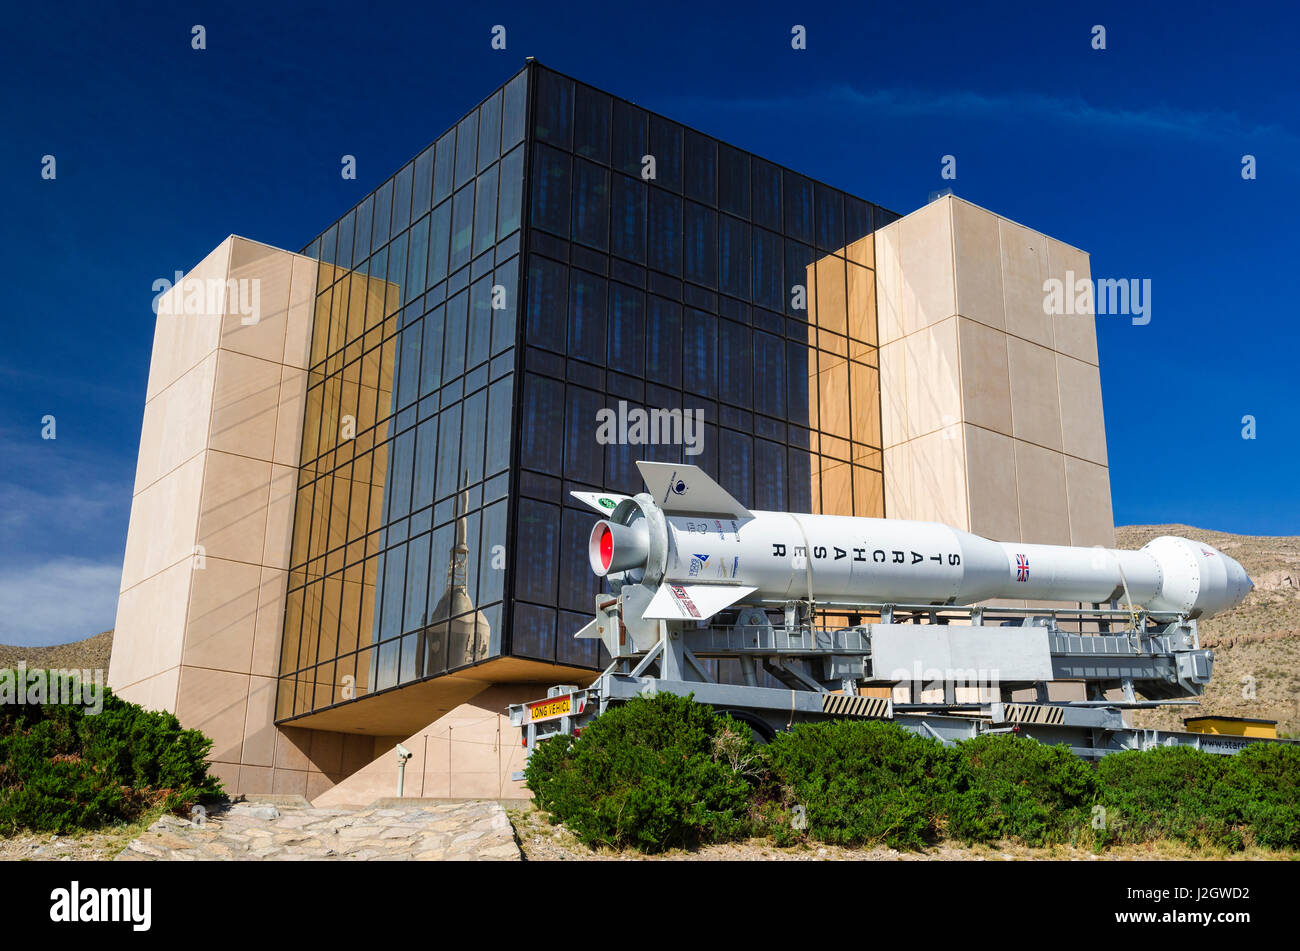 Rockets at the International Space Hall of Fame, Alamogordo, New Mexico, Usa Stock Photo